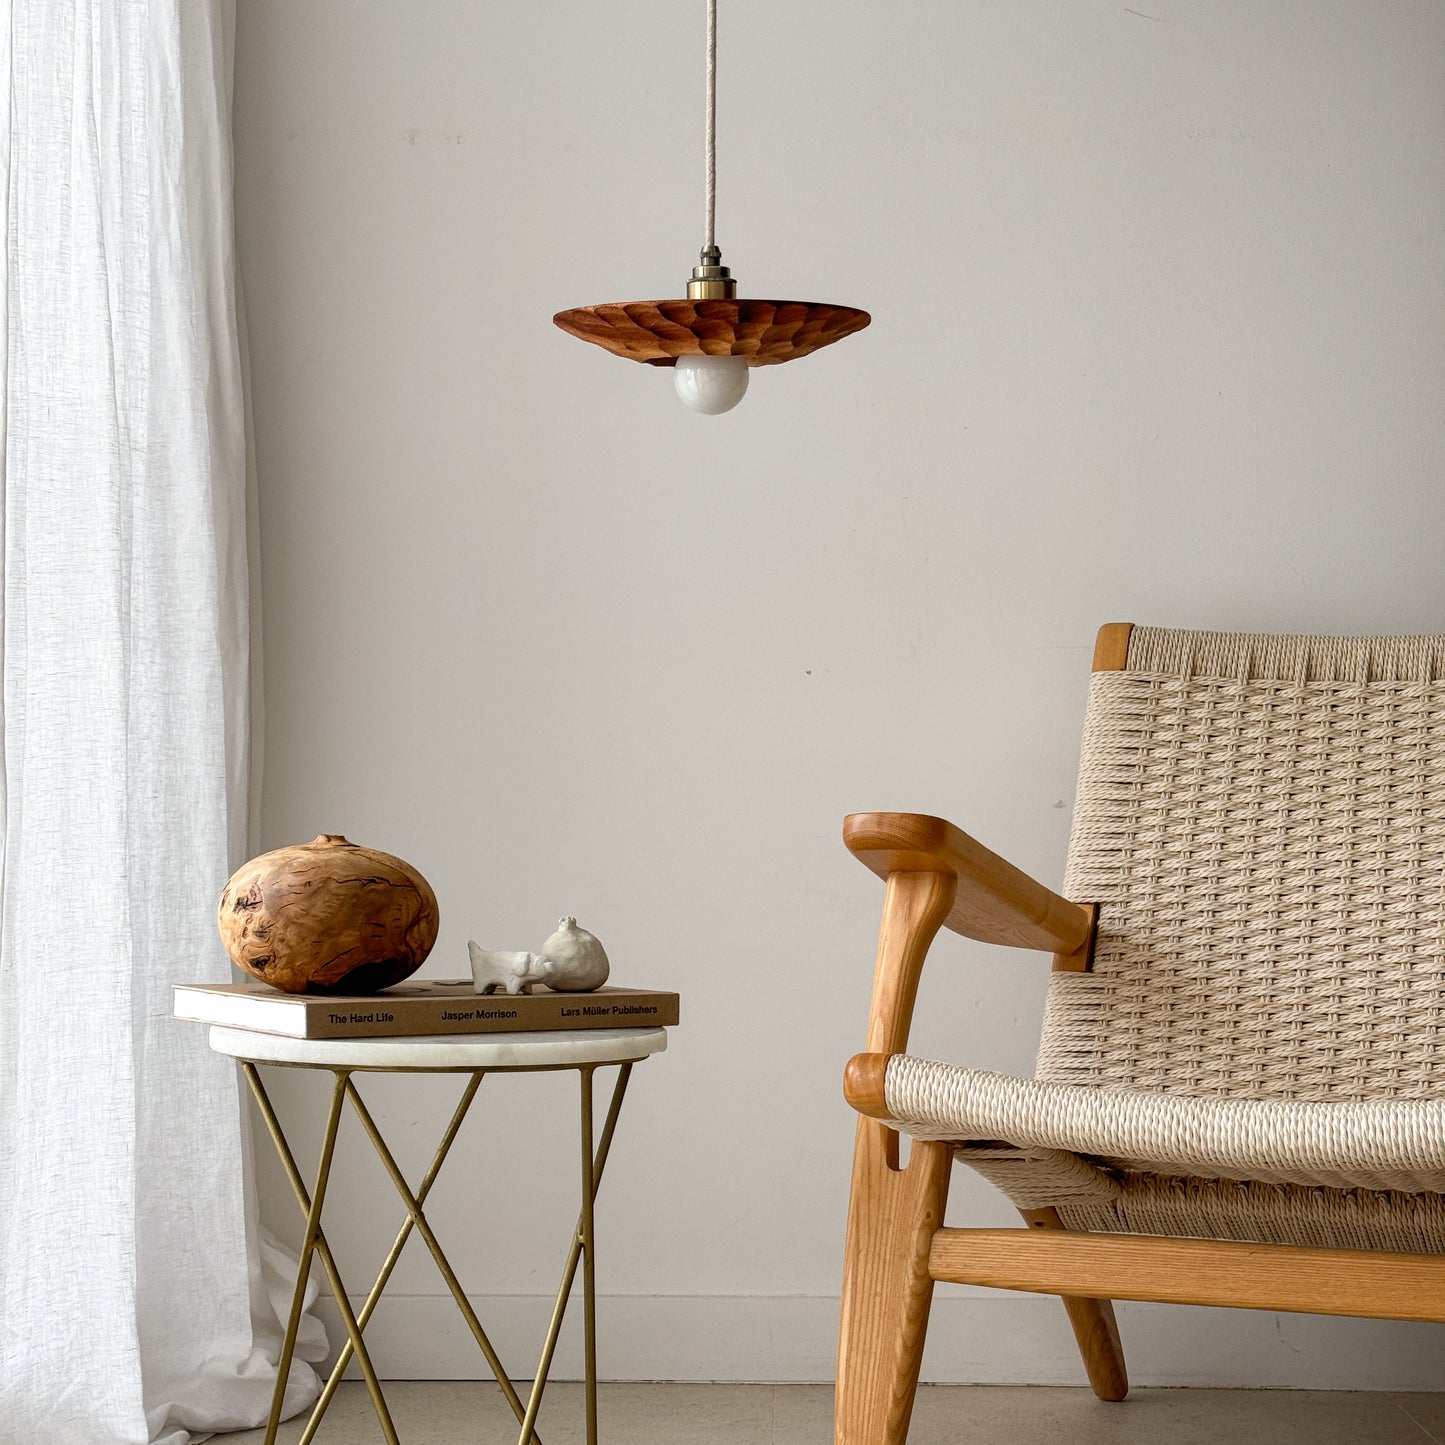 "There is no light without shadow" | Acacia Ceiling Lamp